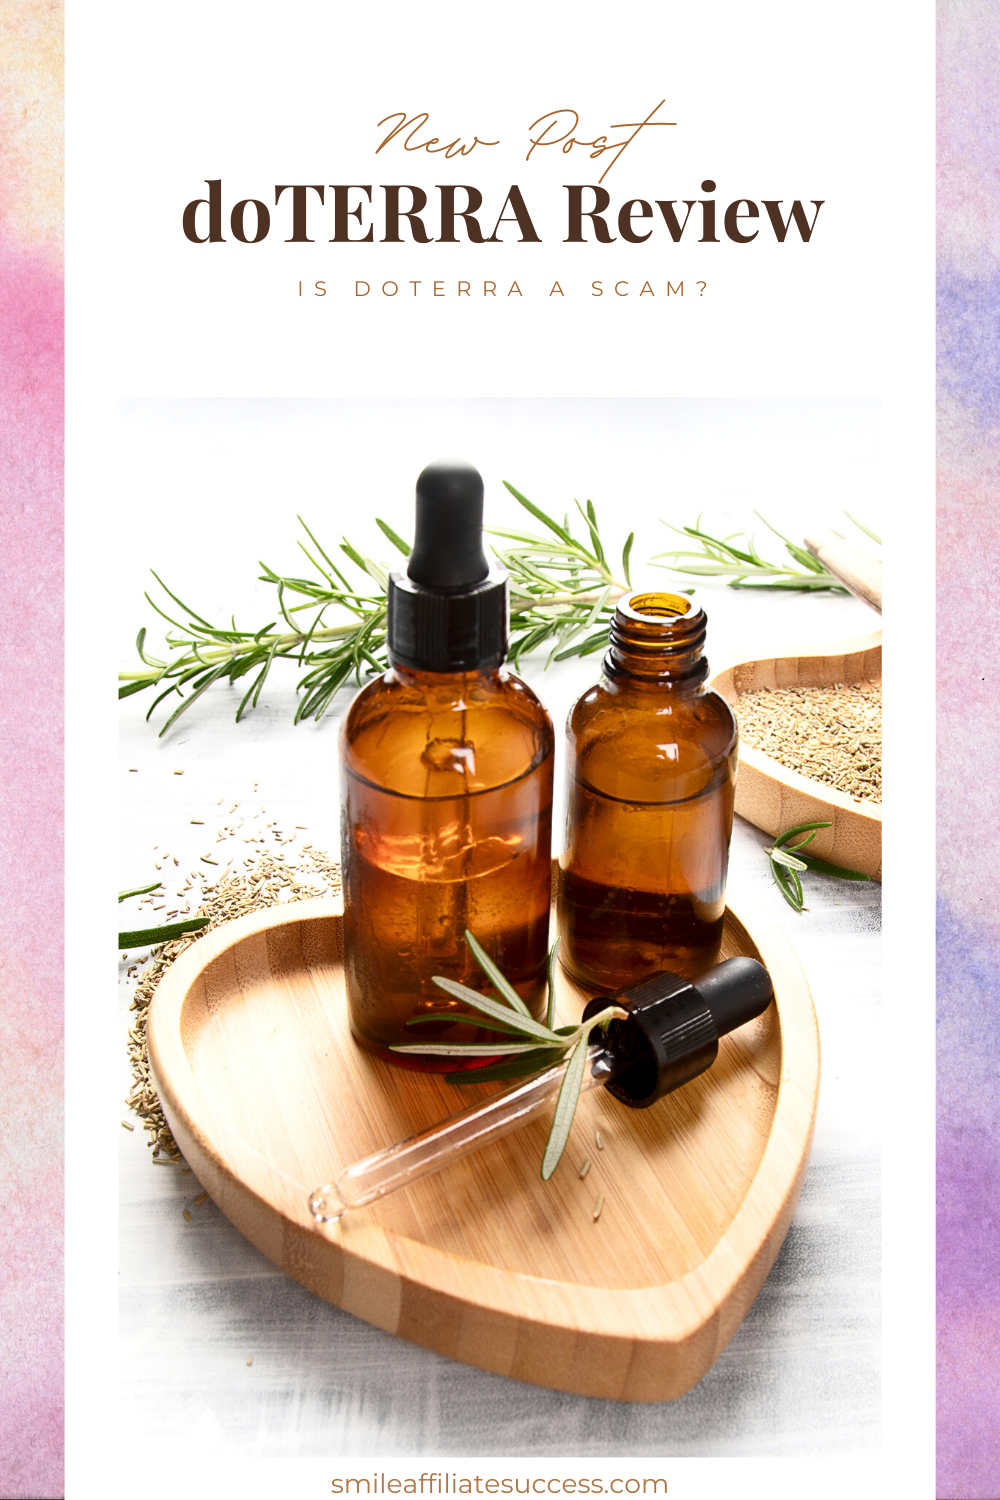 doTERRA Essential Oils Review - Is It A Scam?